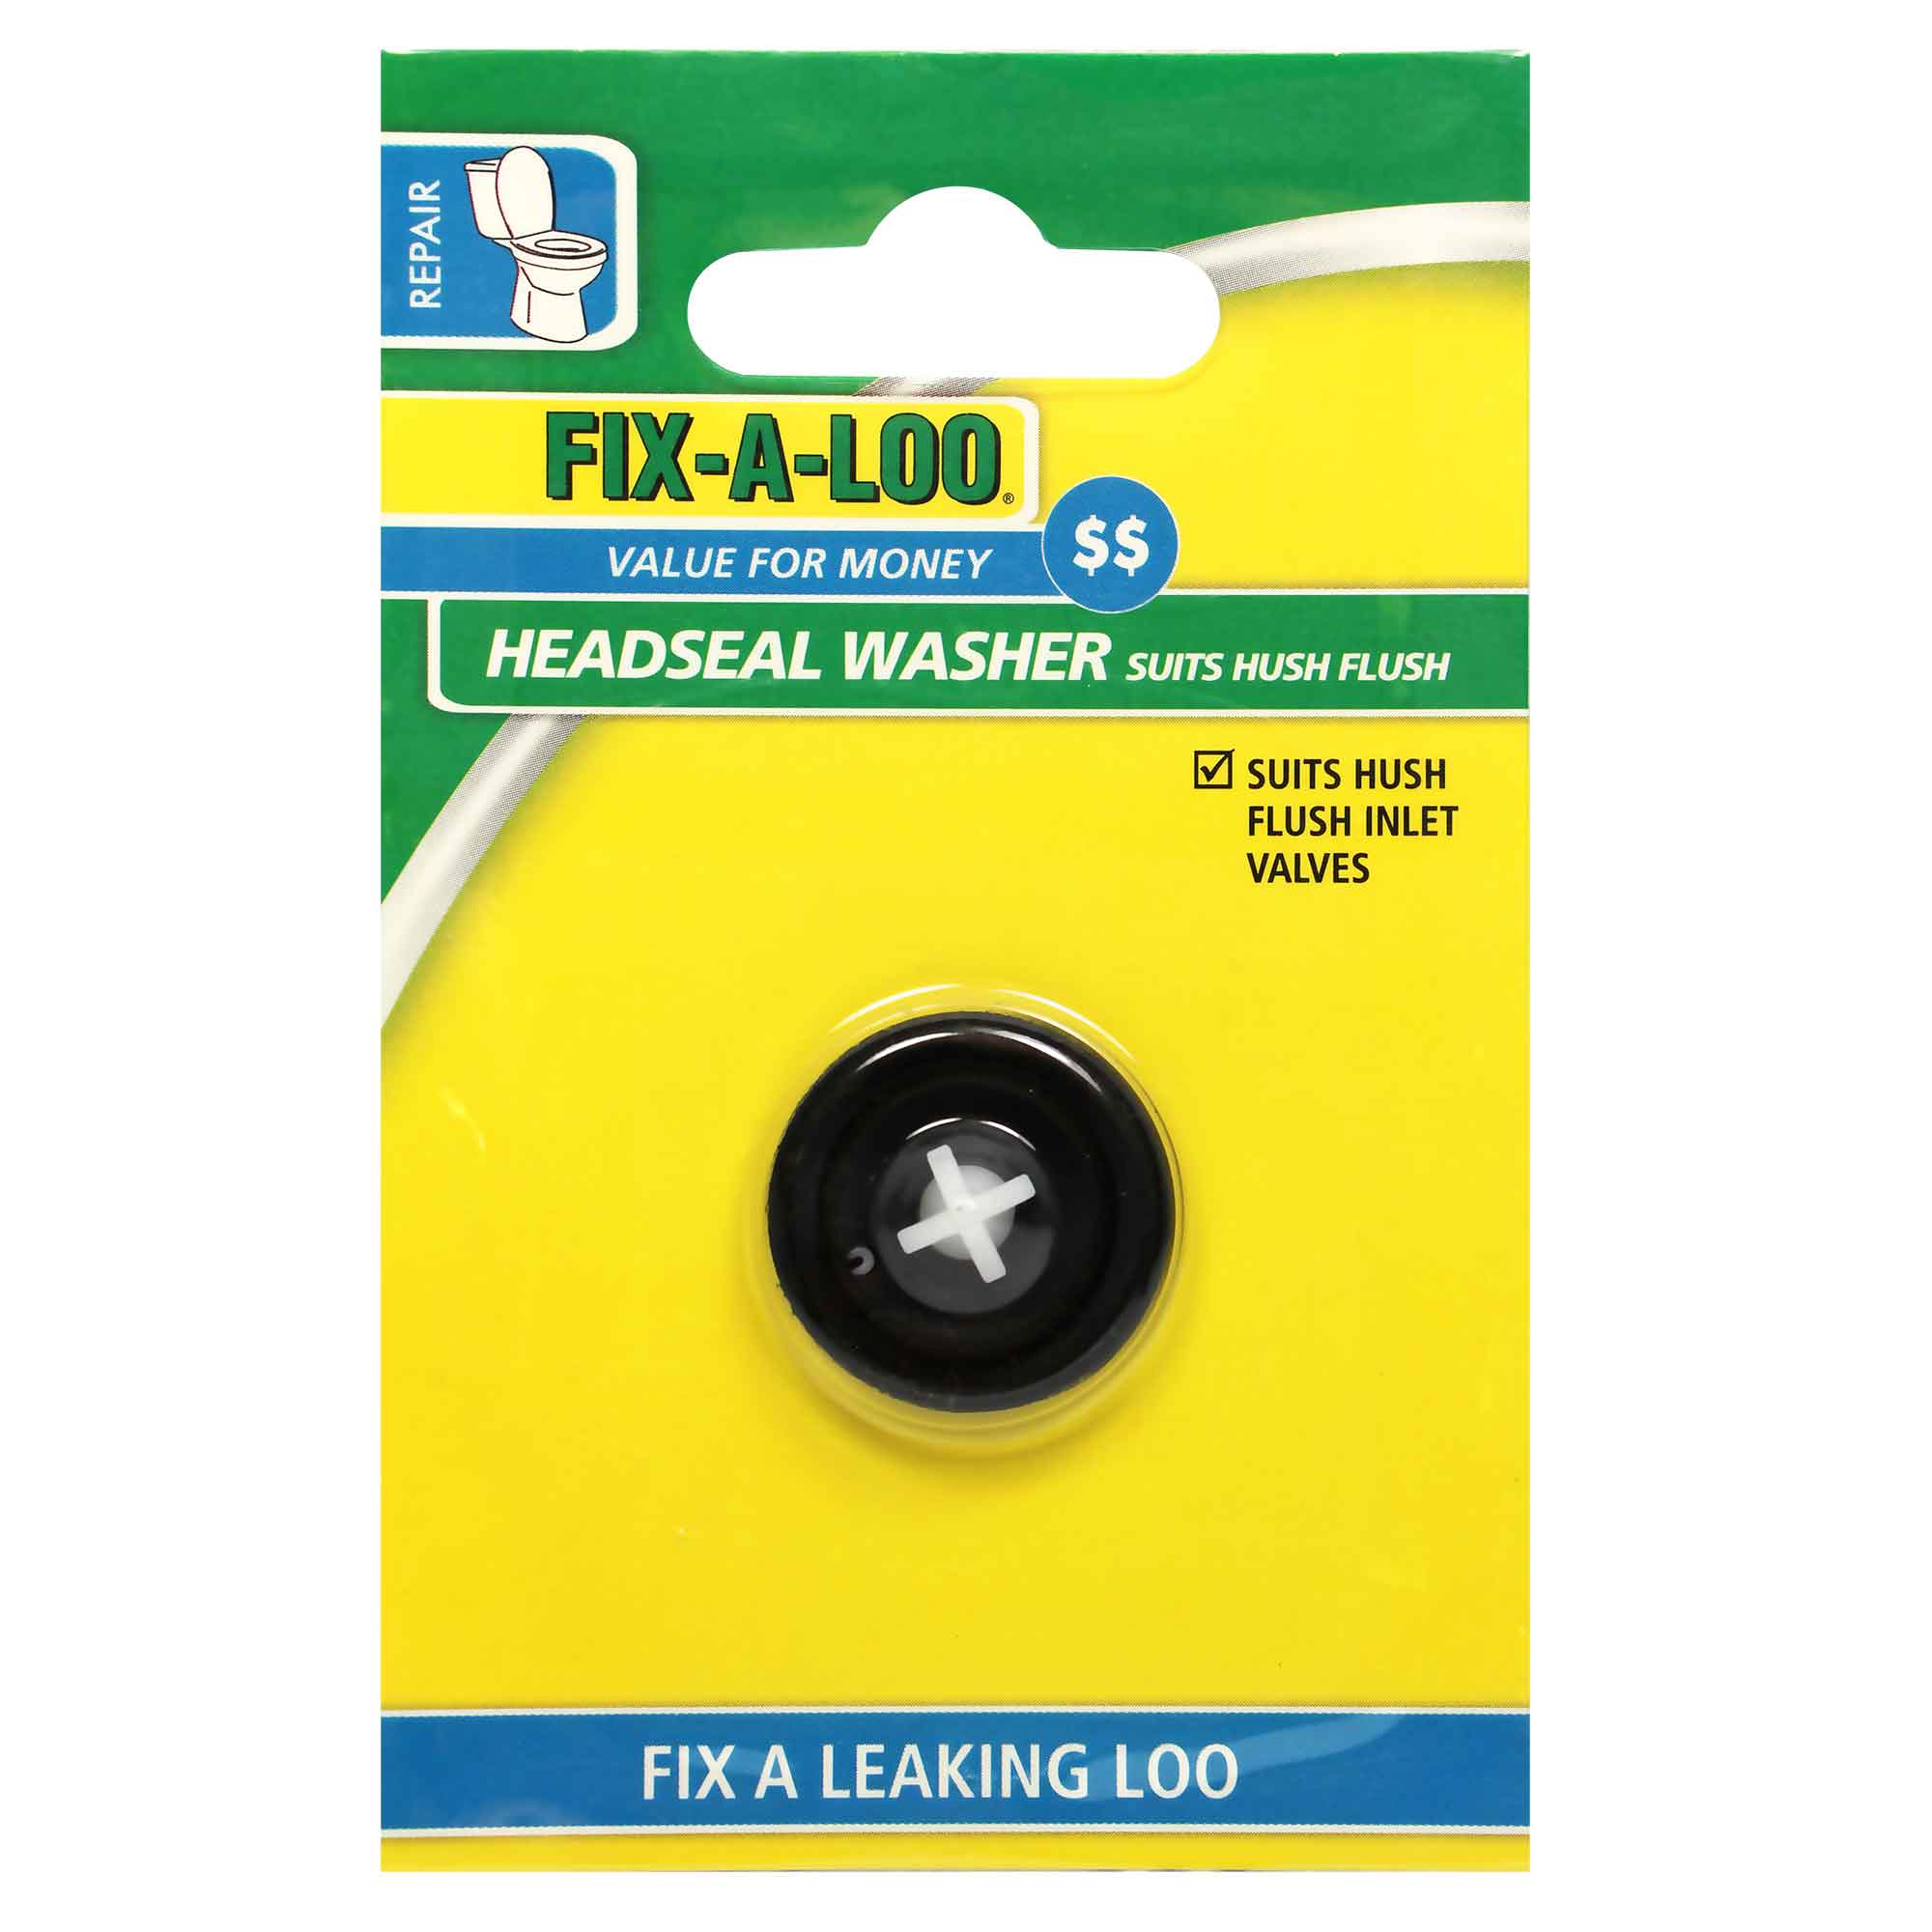 FIX-A-LOO Headseal Washer Suits Hush Flush 233165 - Double Bay Hardware